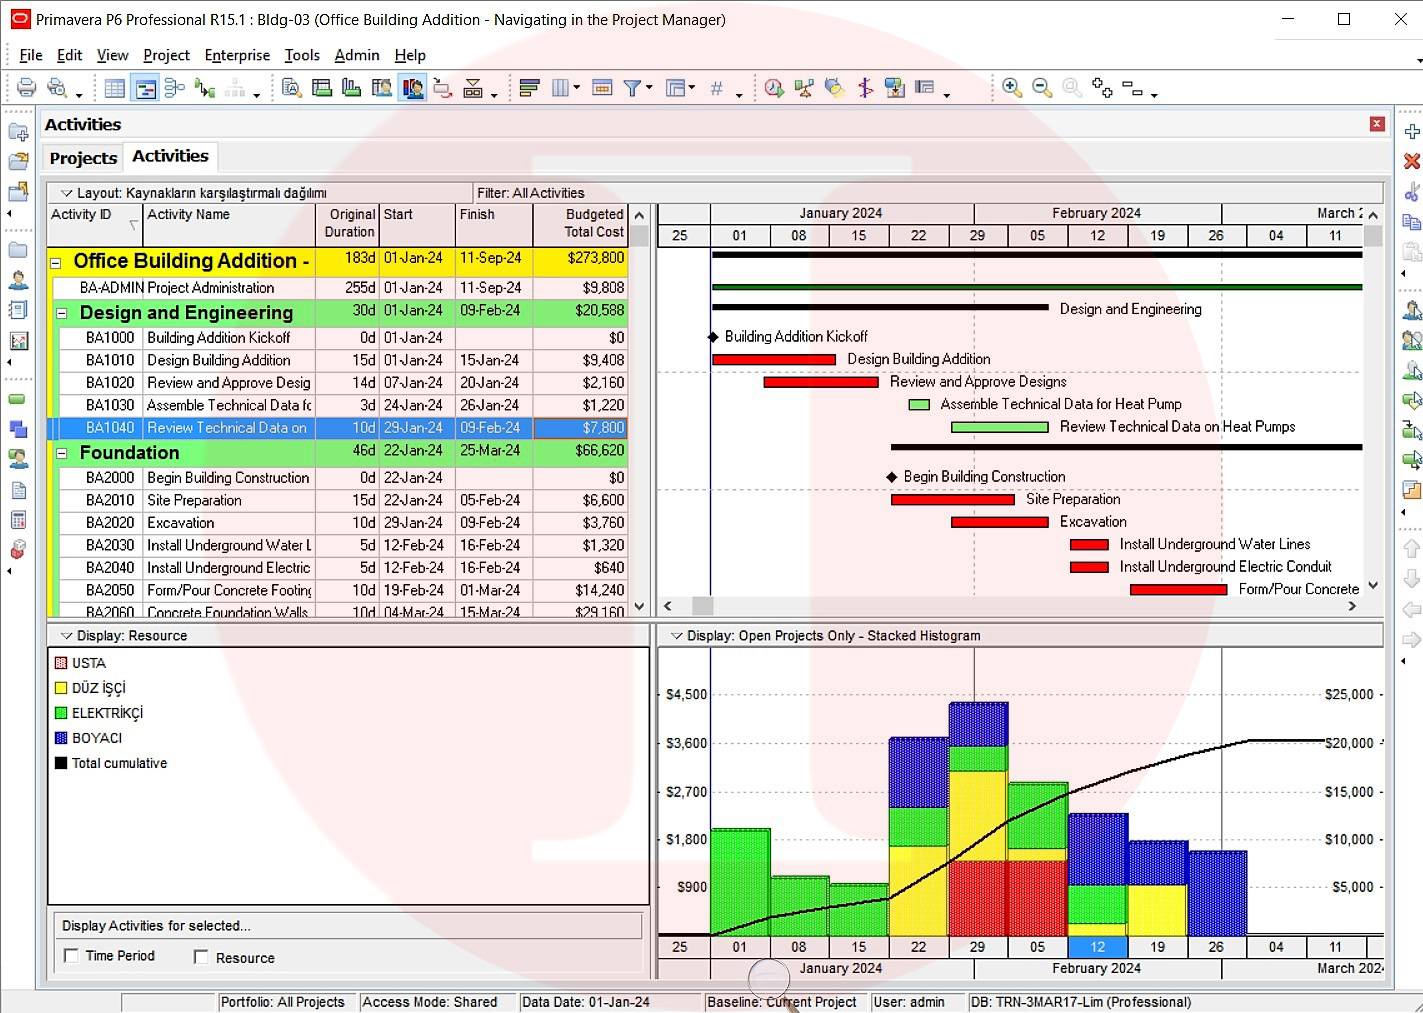 Planning and Scheduling with Oracle Primavera P6 Professional | Akim Engineering